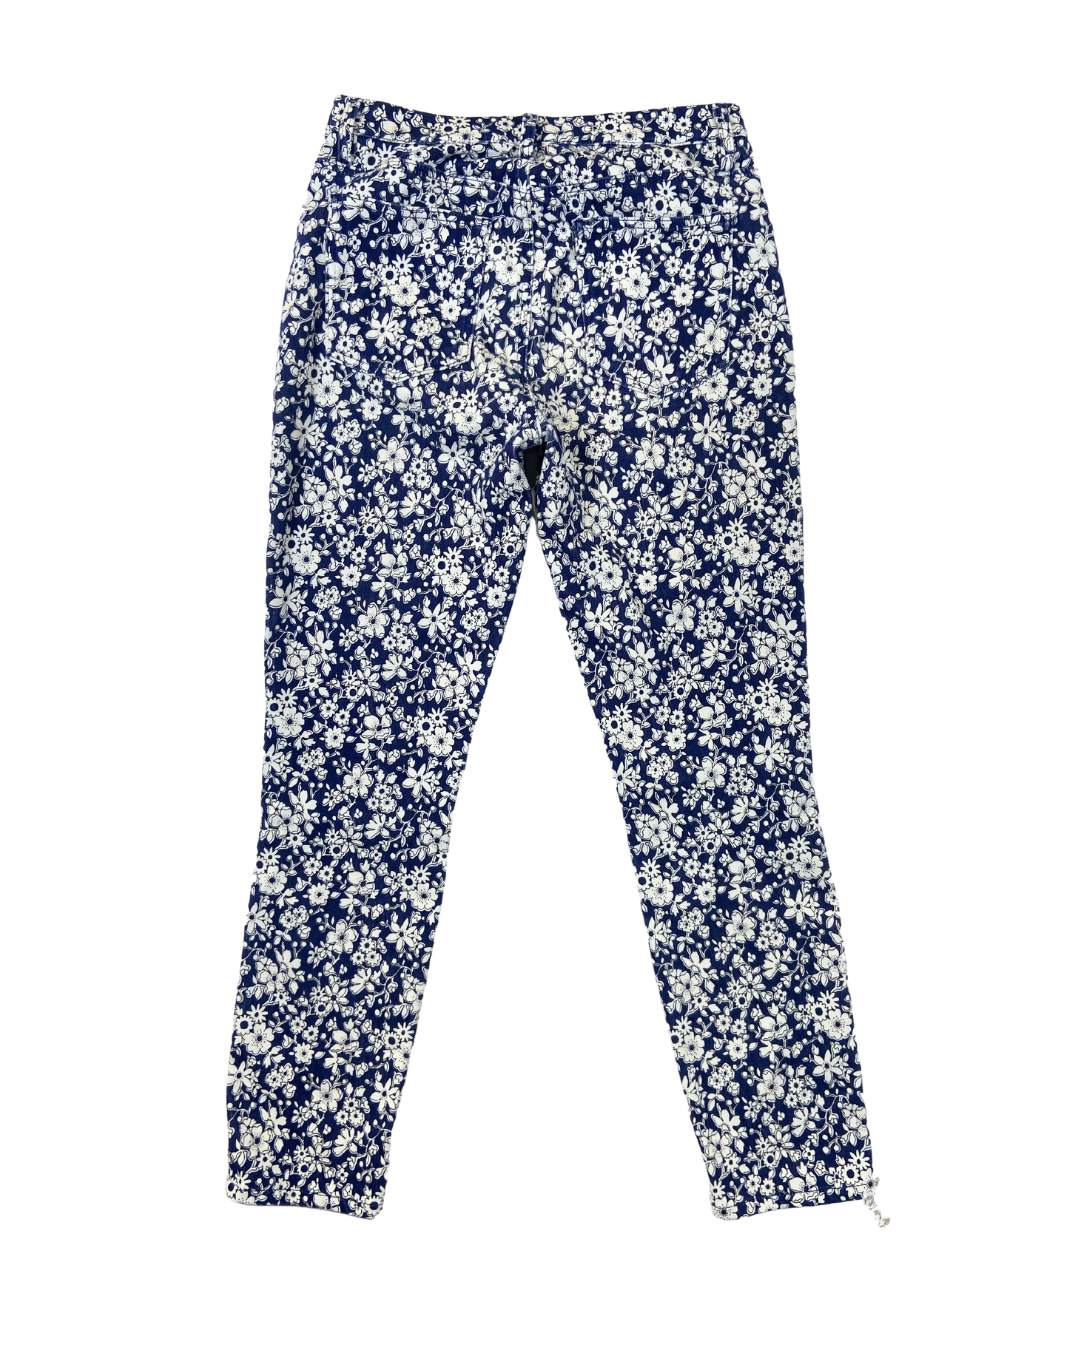 Uniqlo Floral Navy Trousers